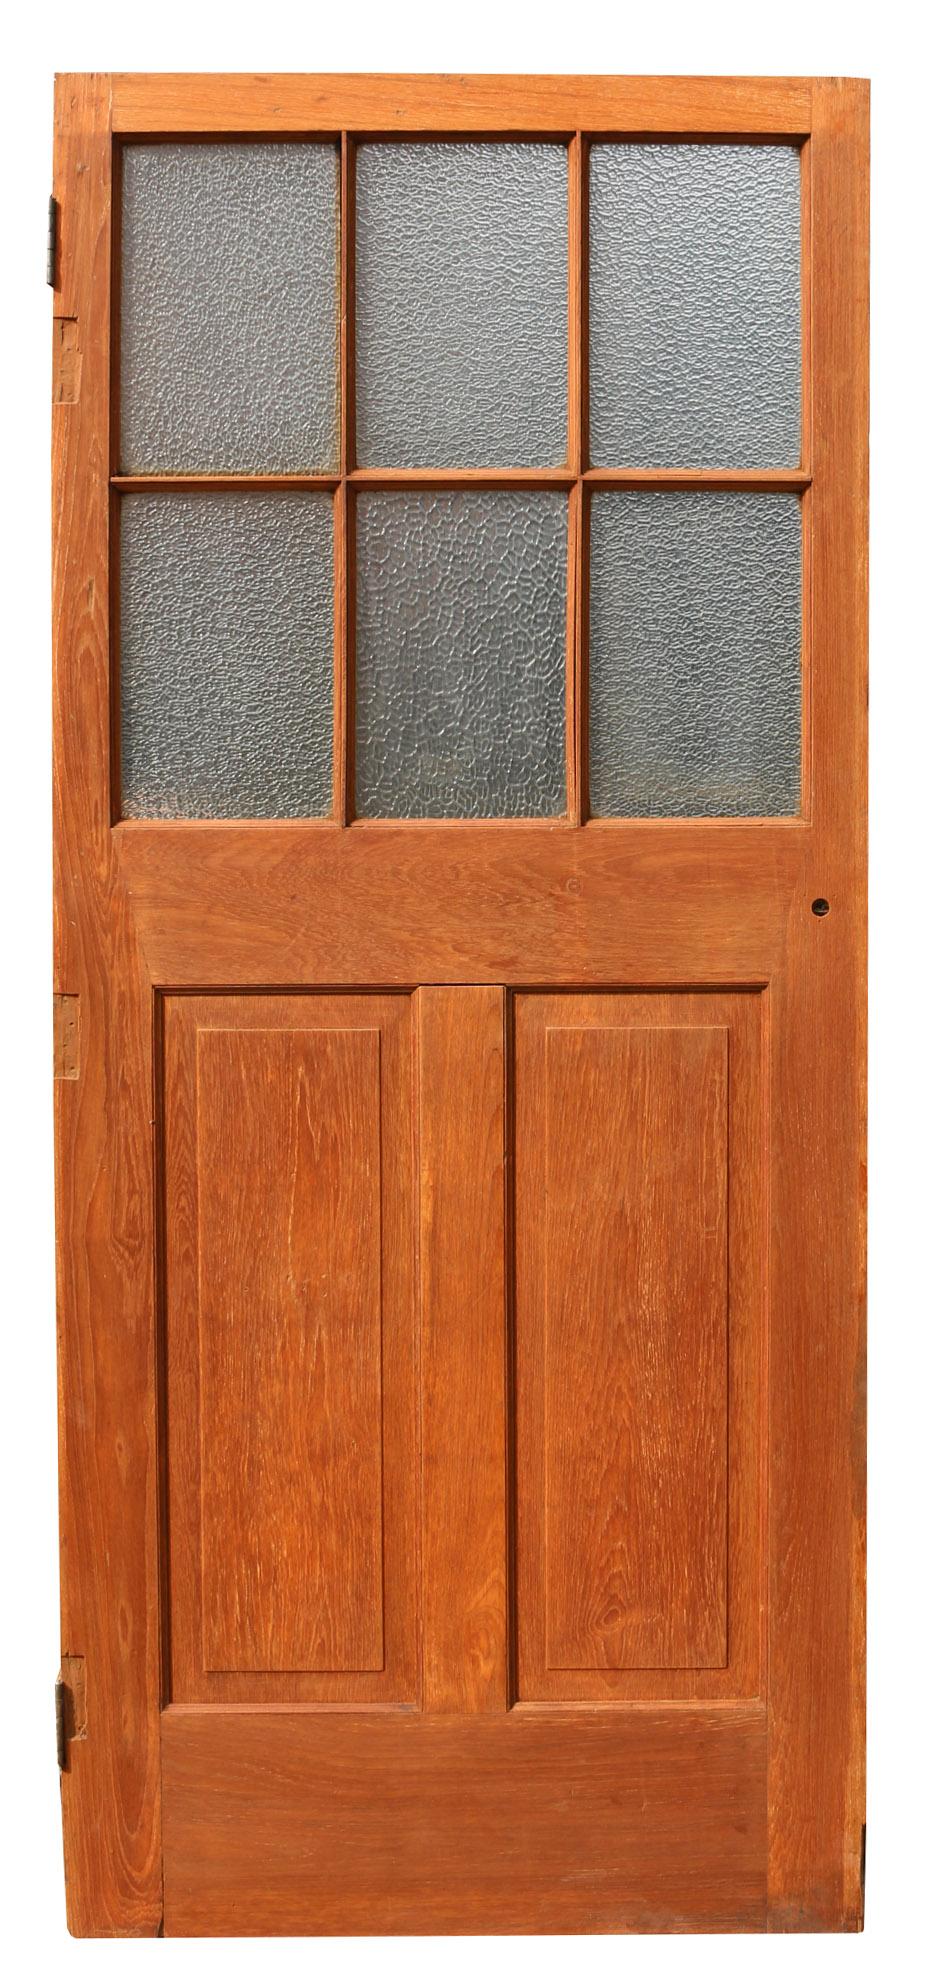 Reclaimed Glazed Teak Wood Door In Good Condition For Sale In Wormelow, Herefordshire